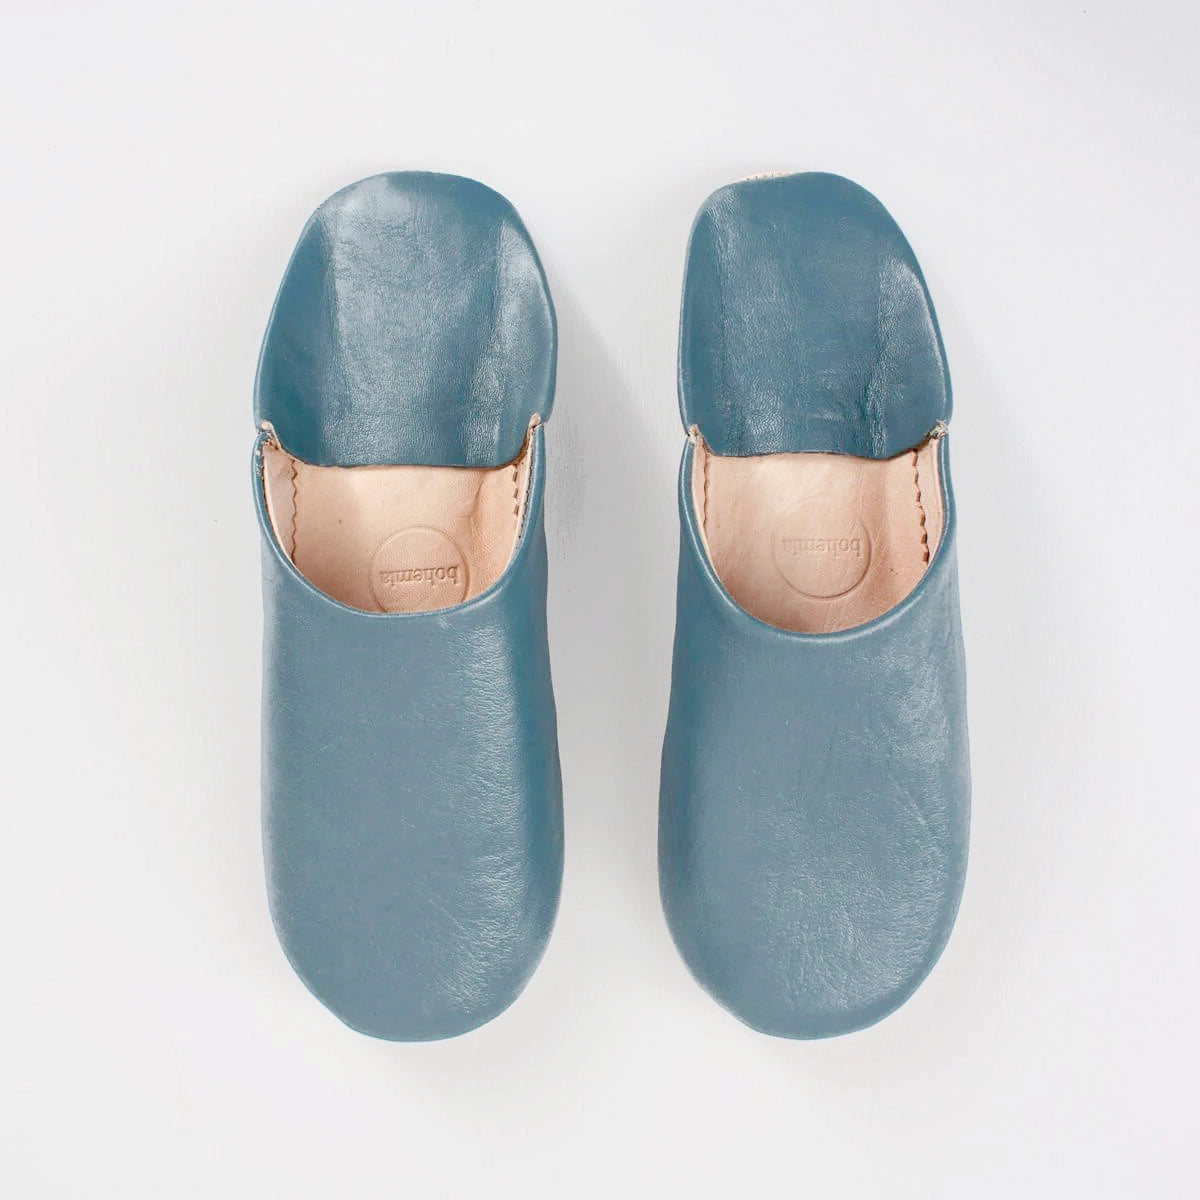 Moroccan Babouche Slippers, Blue Grey